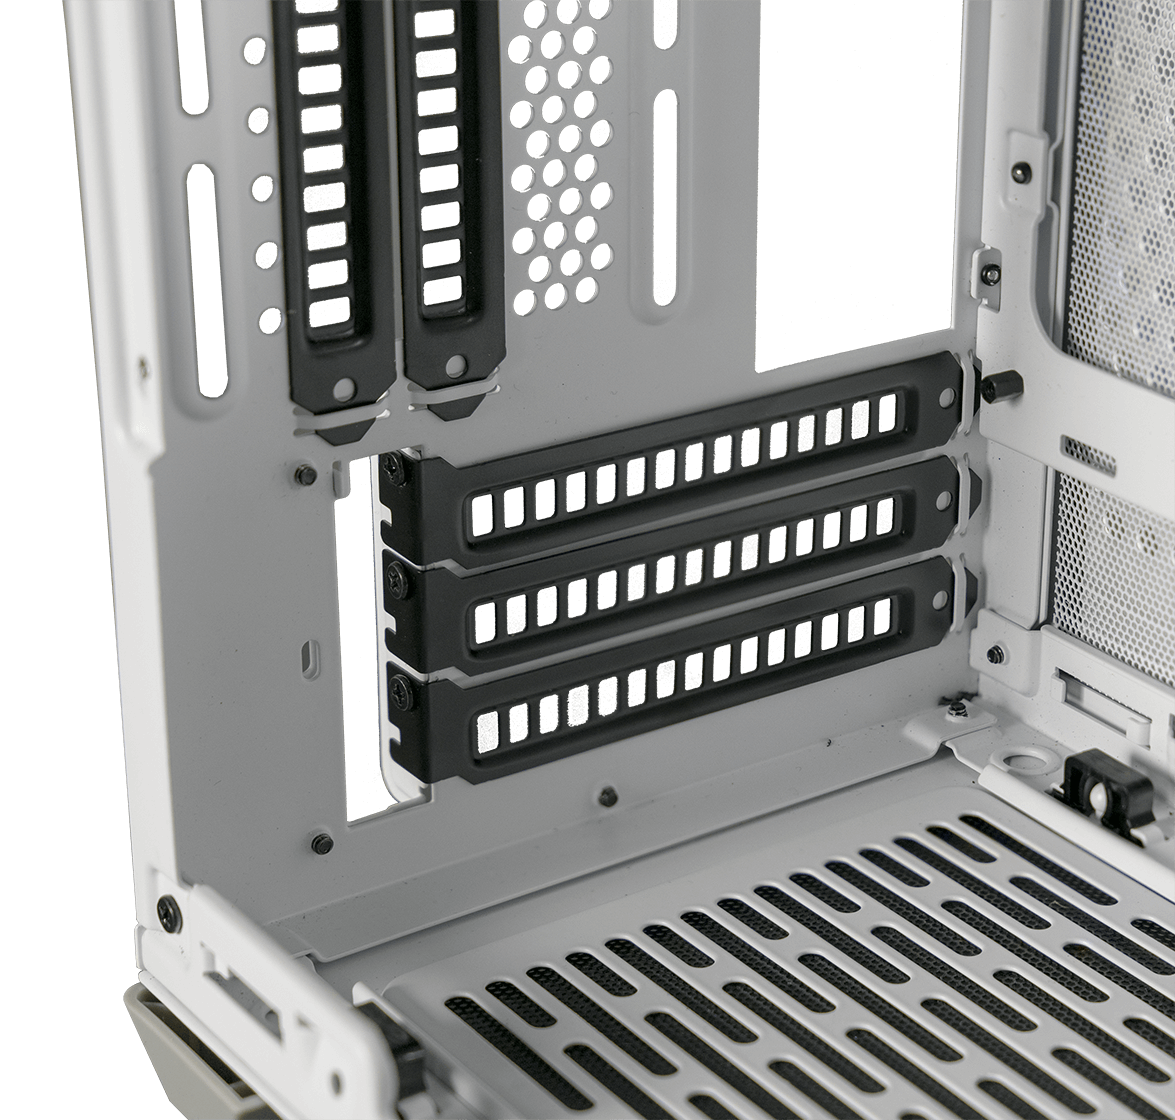 Triple-slot GPU support and Included Vertical Riser Cable